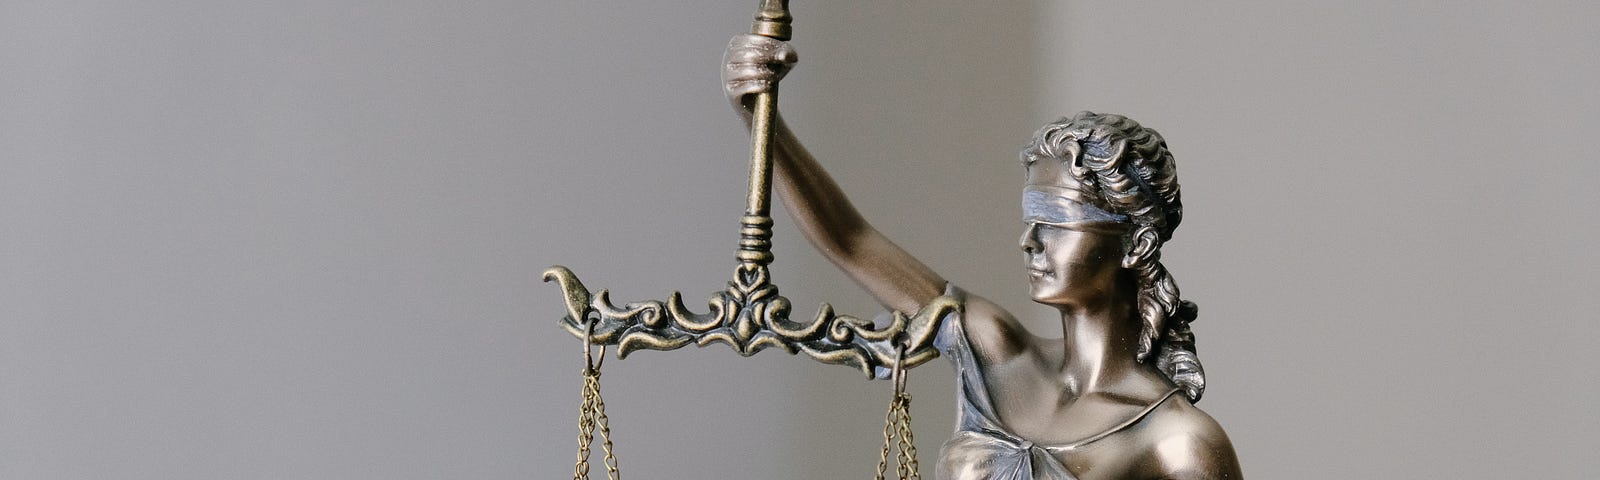 Woman blindfolded holding scales of justice